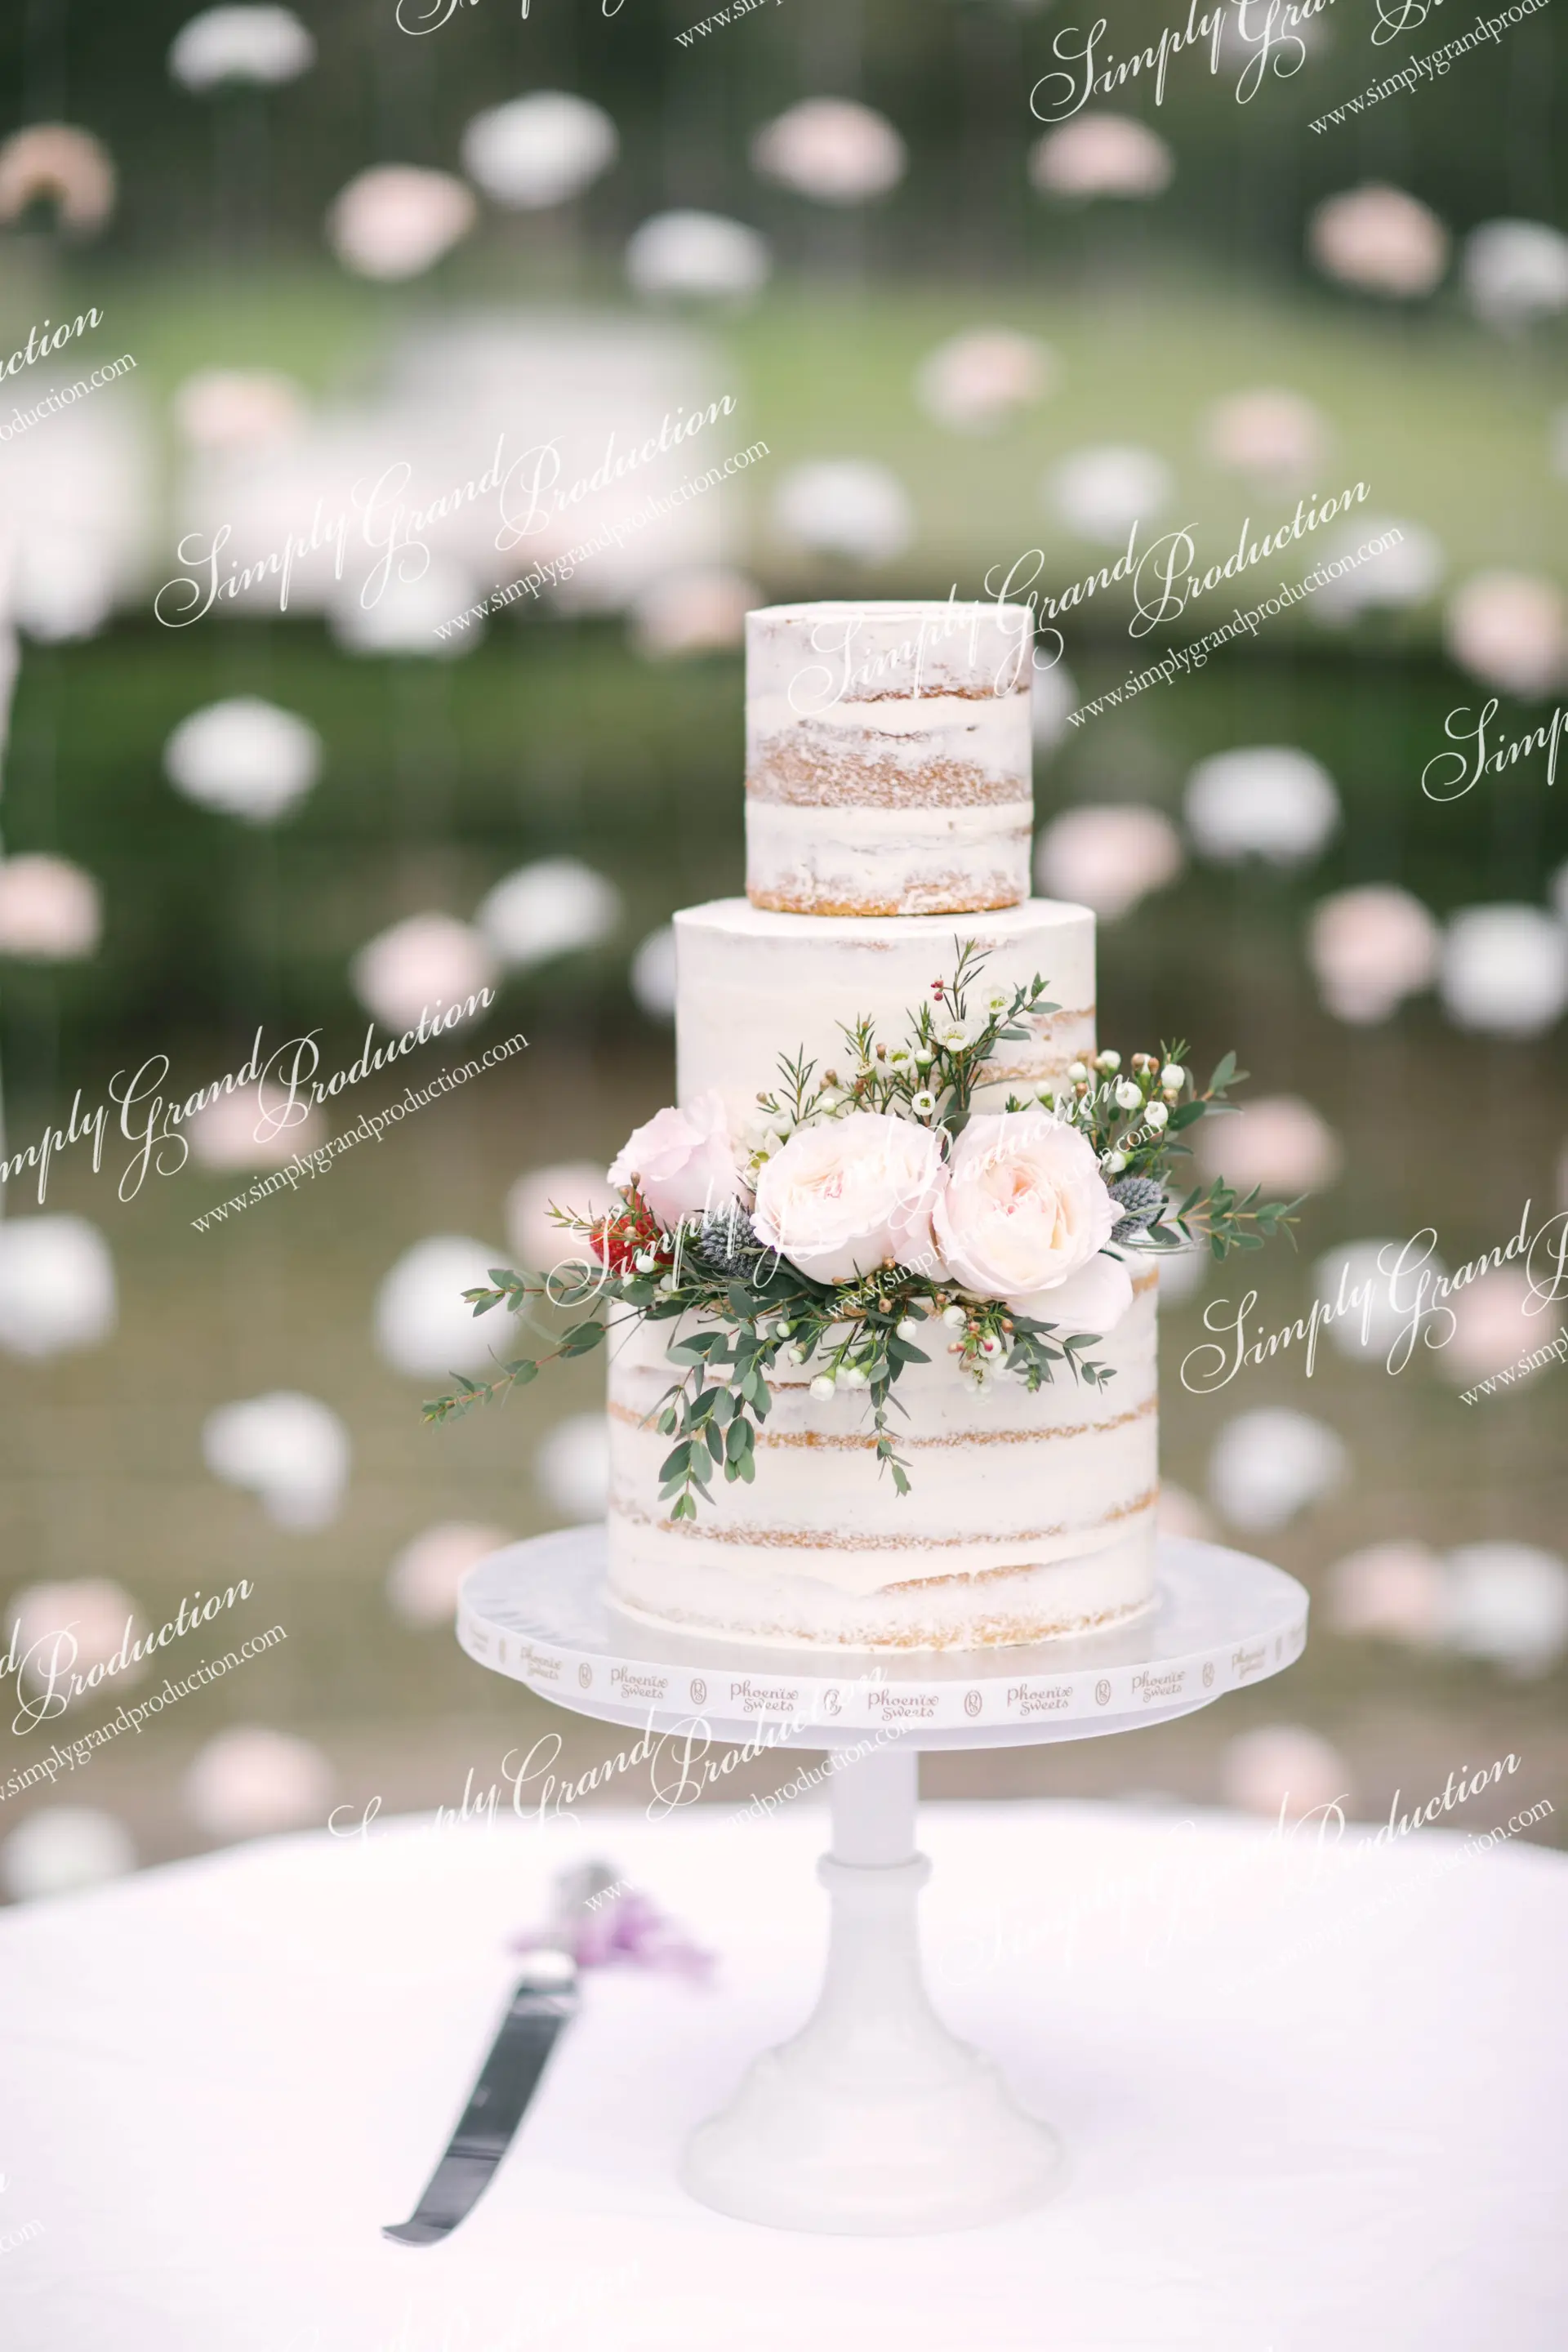 Simply_Grand_Production_Outdoor_wedding_decoration_rustic_cake_Beas_River_1_8.jpg